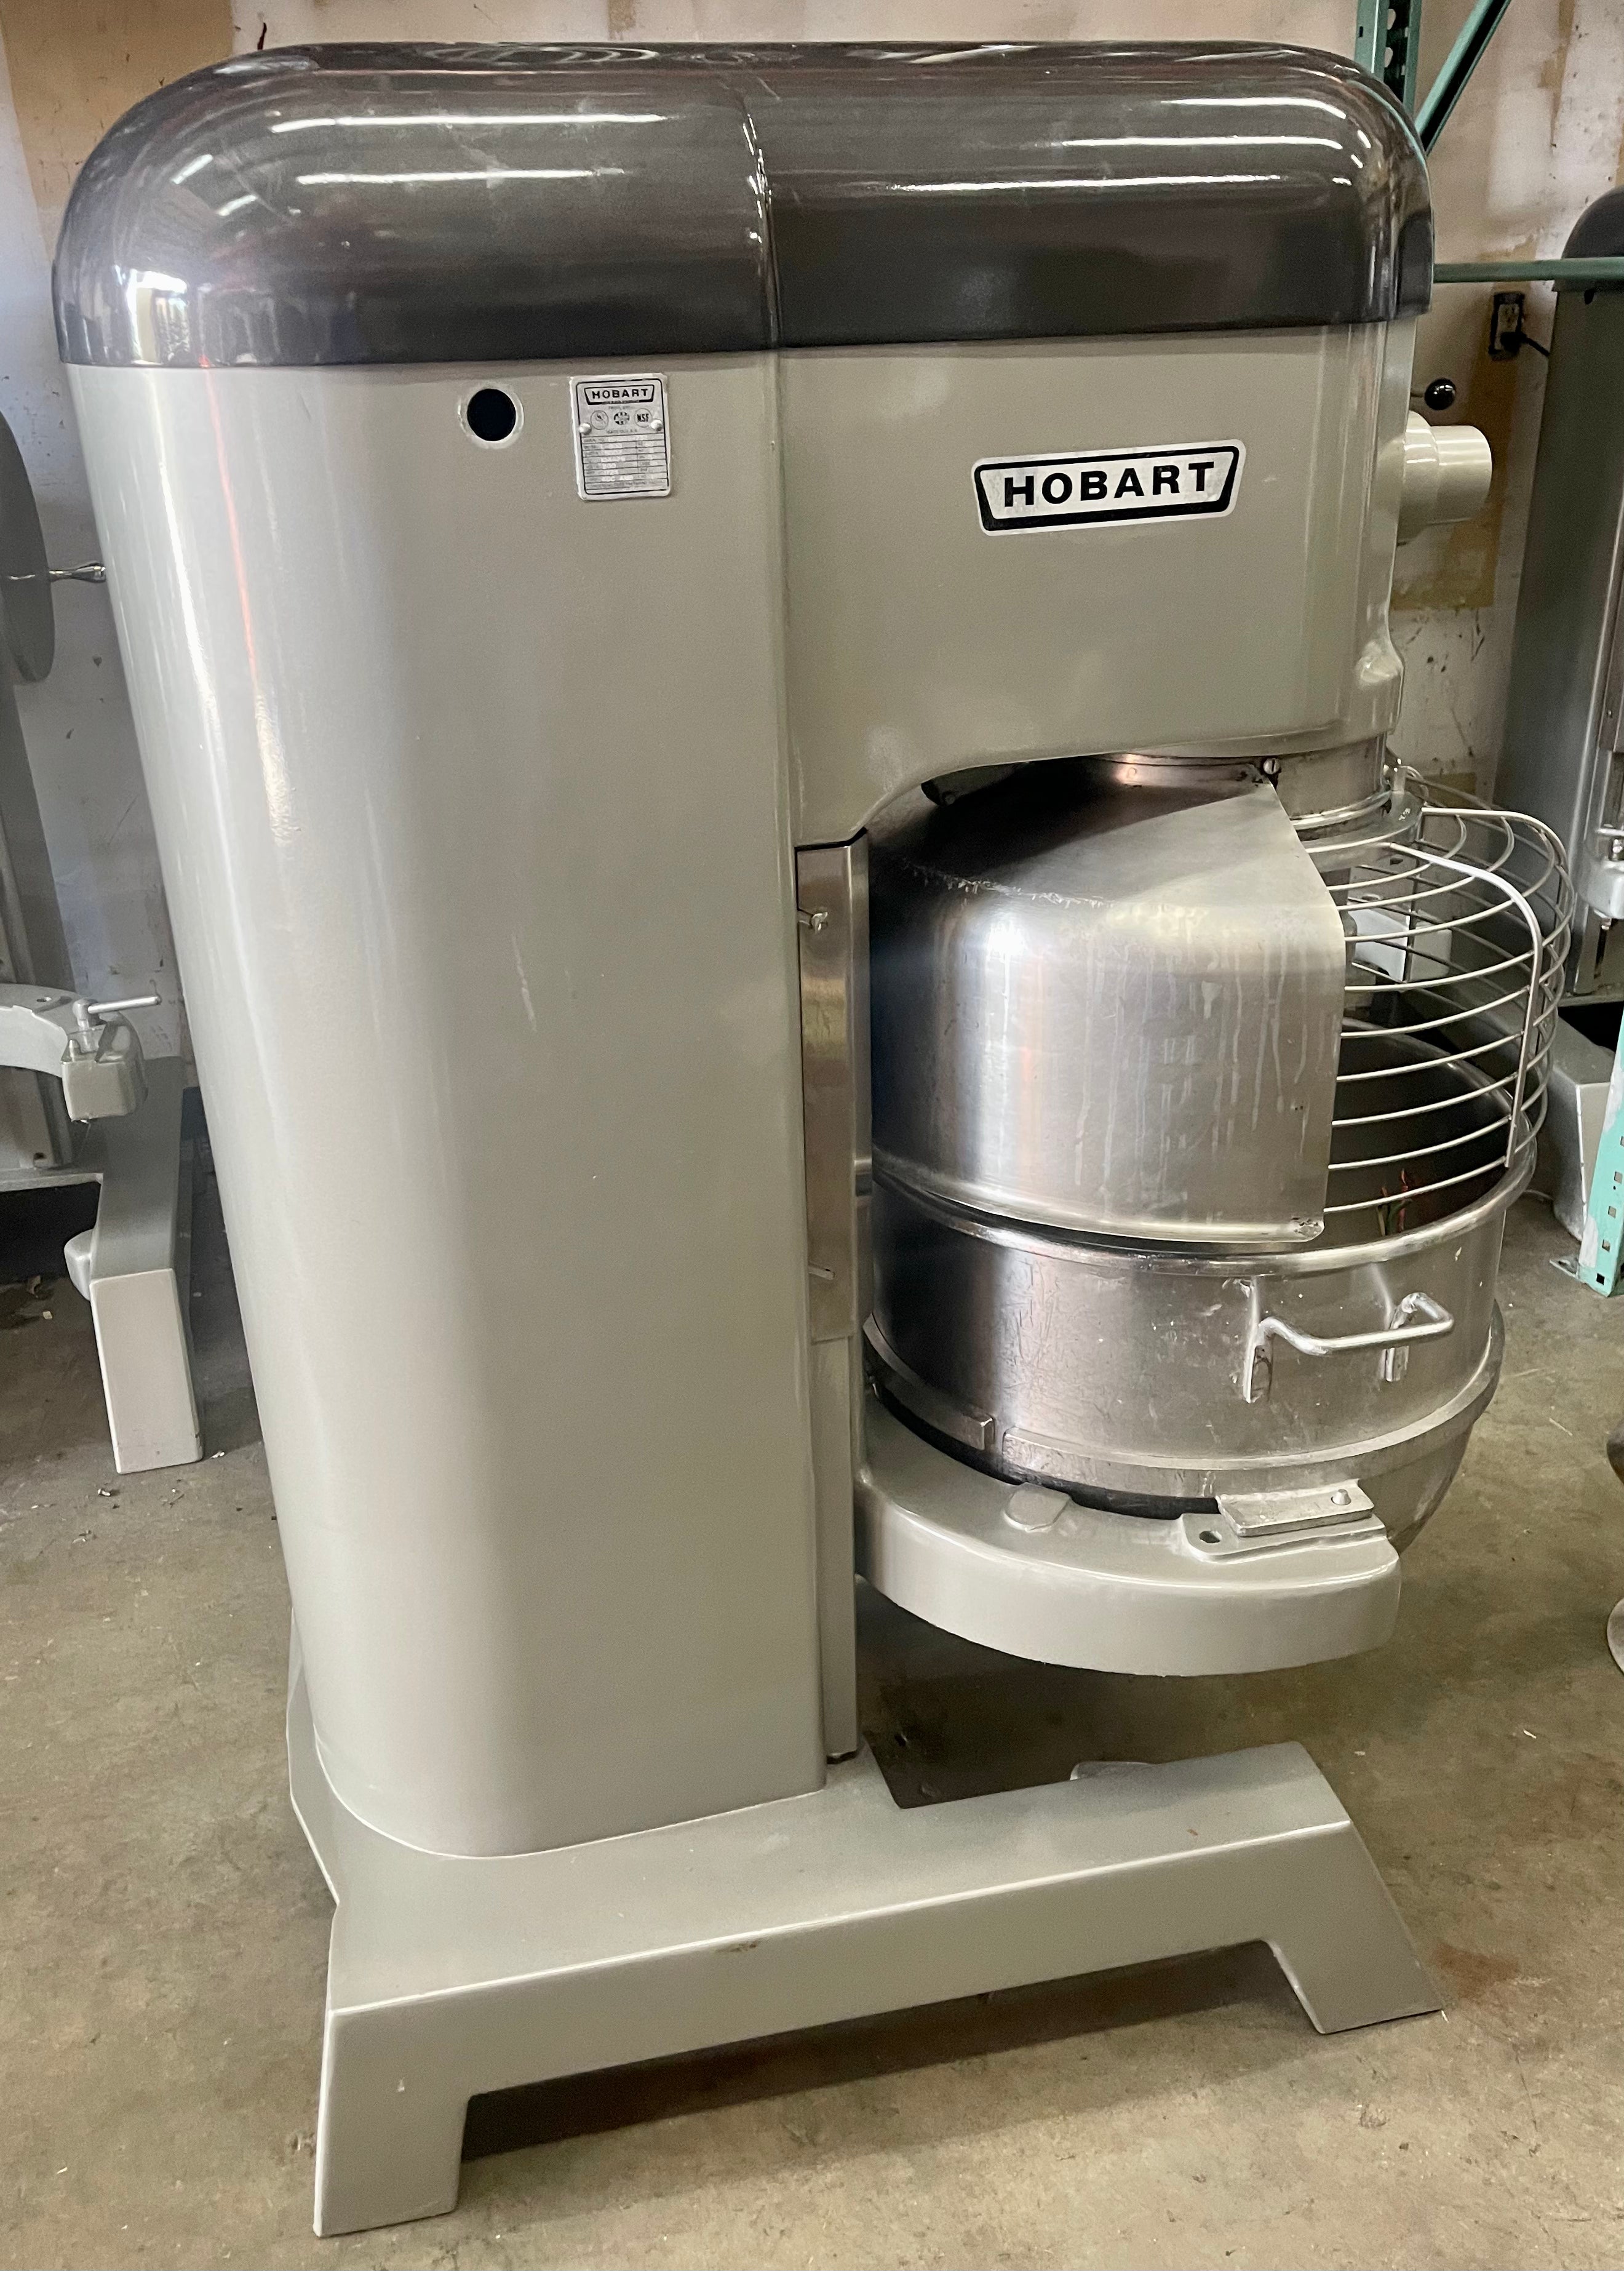 Hobart L800 3 phase 2HP Bowlguard mixer. Can be sold with 60 qt reducer ring for additional fee